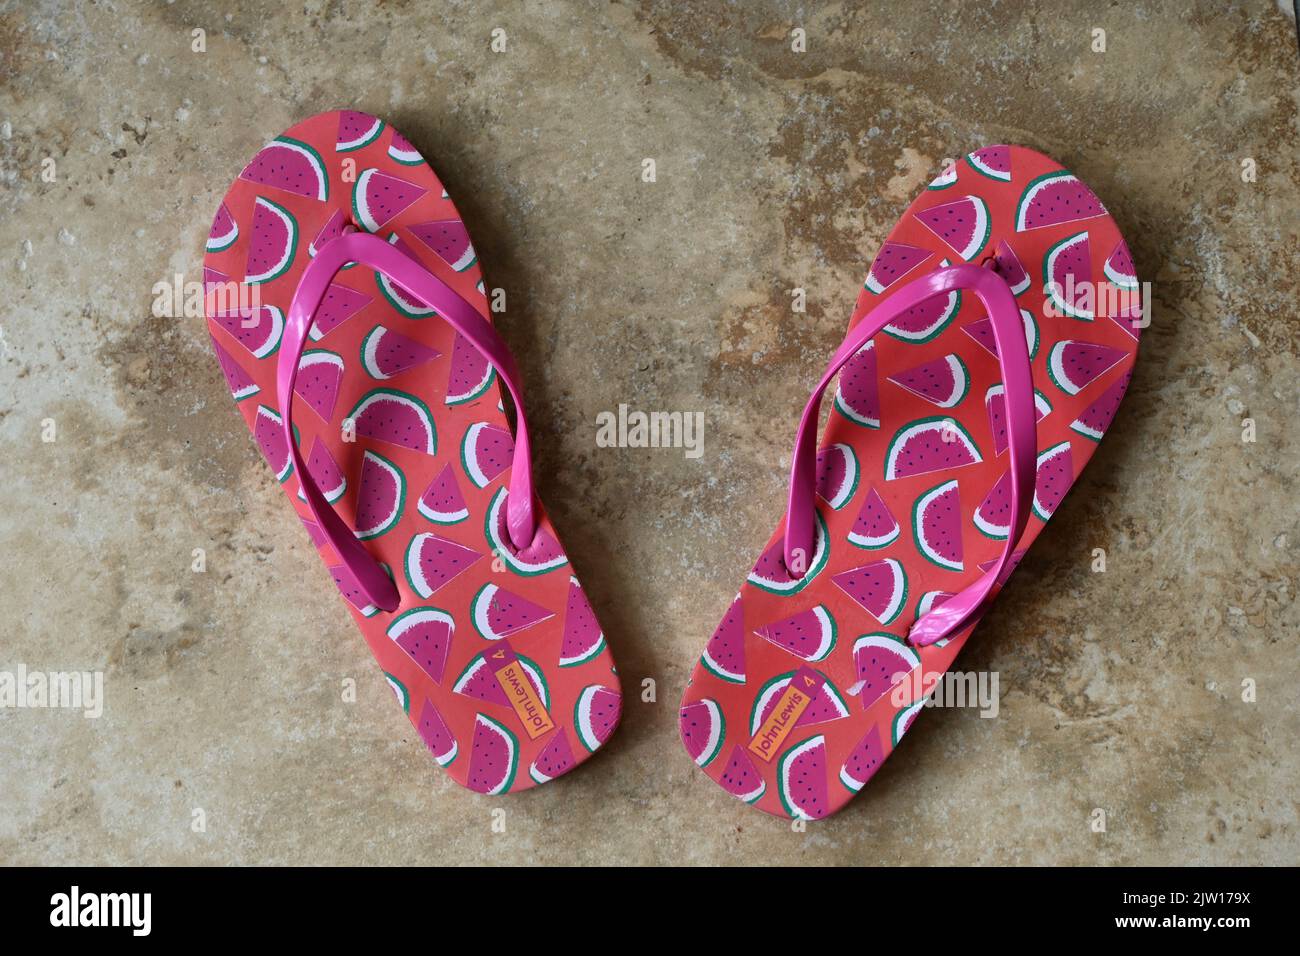 pair of womens flip flops with watermelon design Stock Photo